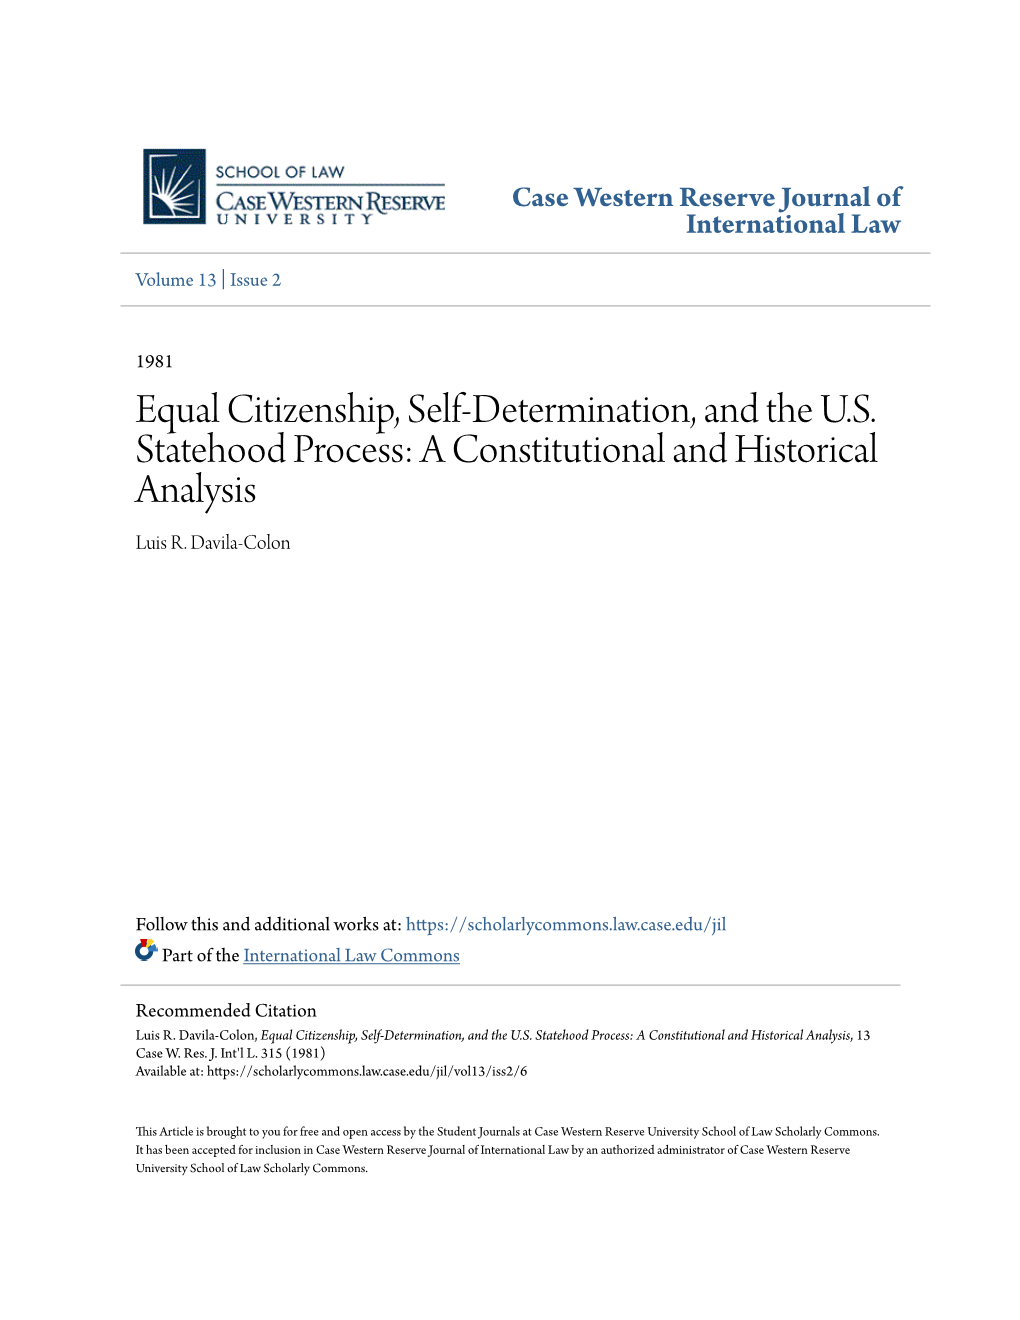 Equal Citizenship, Self-Determination, and the US Statehood Process